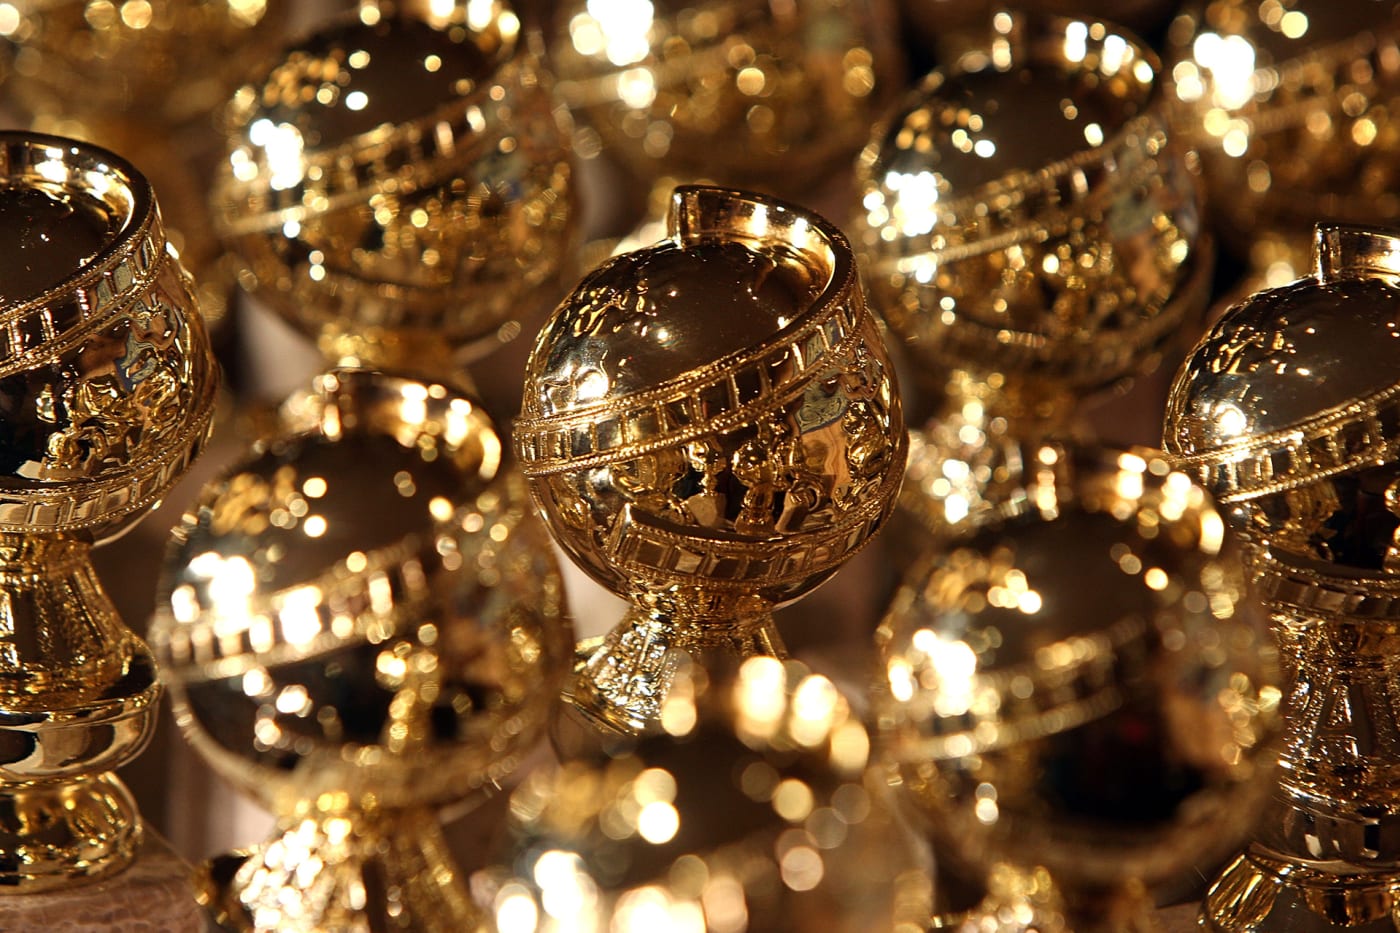 Golden Globe Awards 2021 Nominations and Snubs